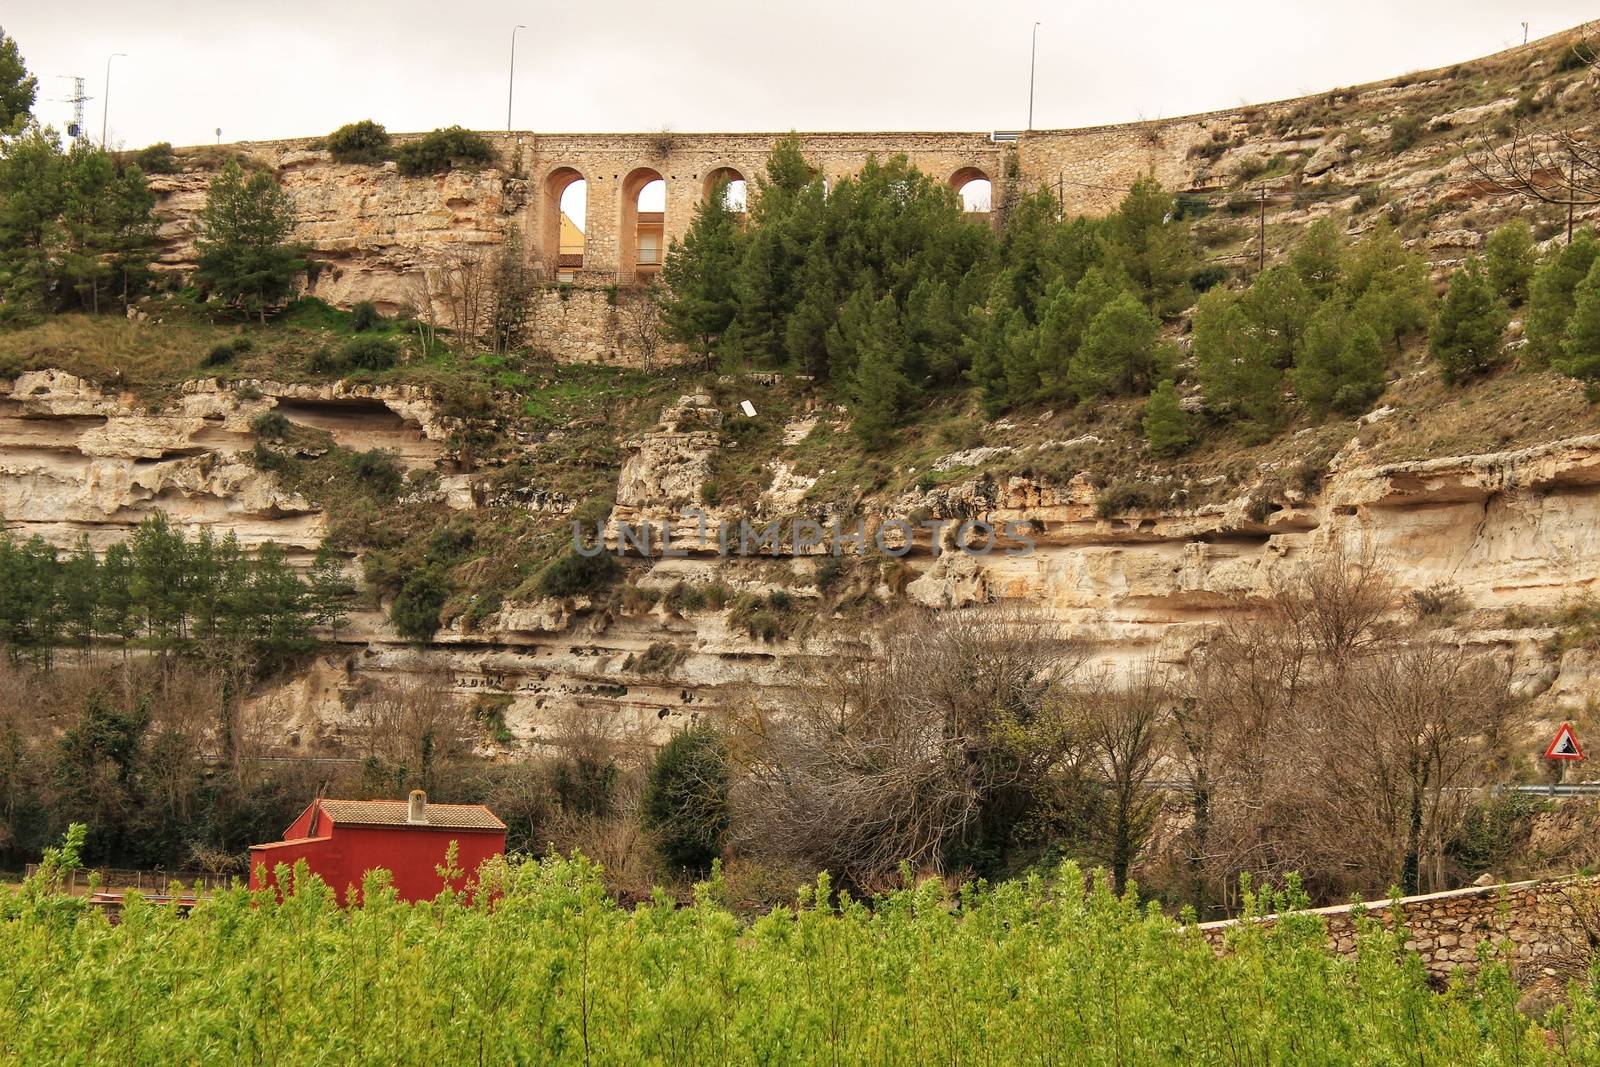 Mountain landscape with wooden house and view of old stone aqueduct in Jorquera, Spain